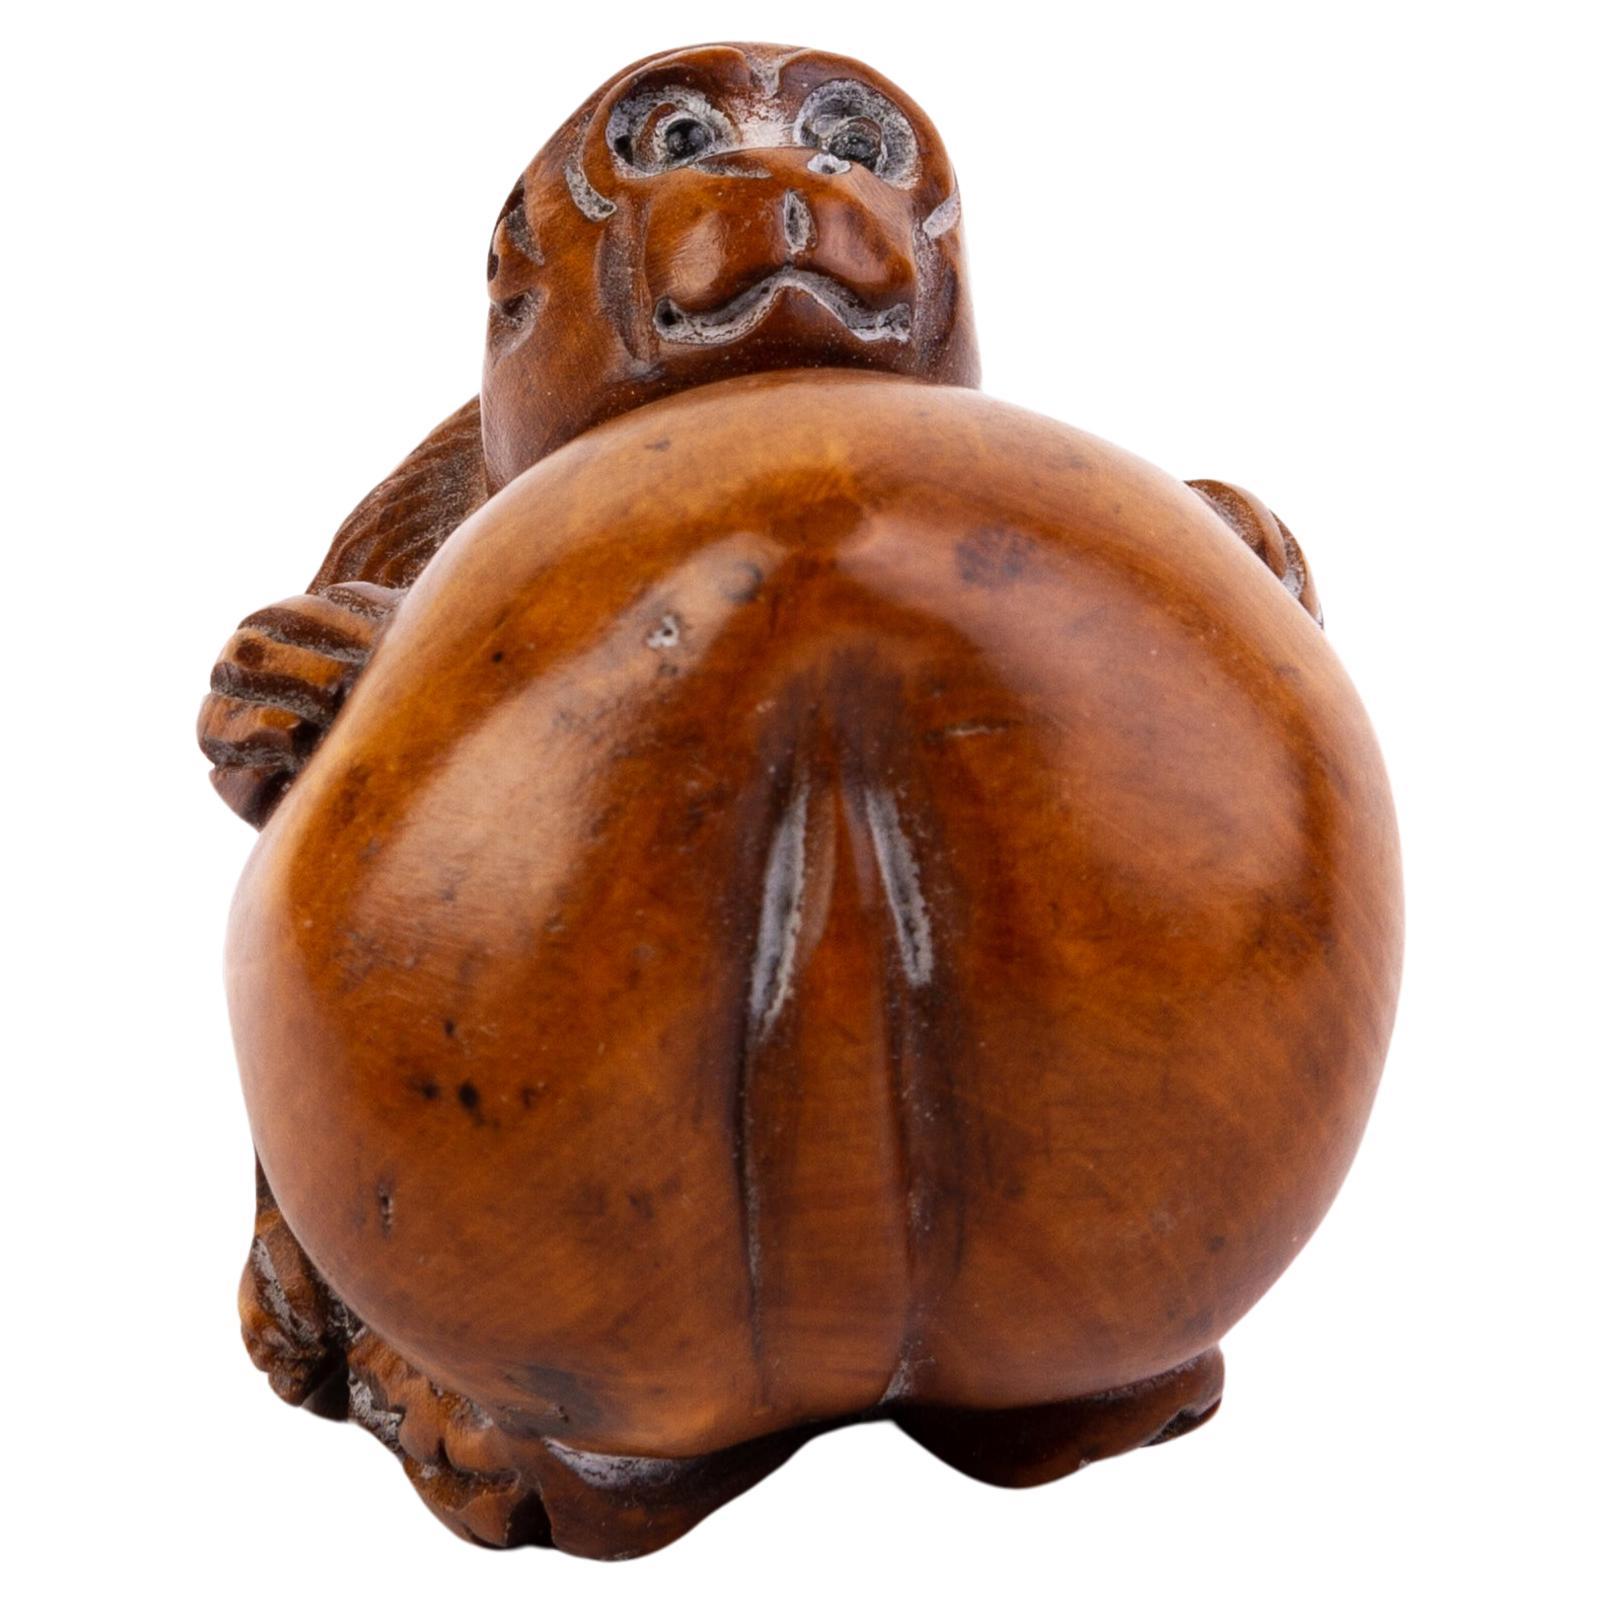 In good condition
From a private collection
Free international shipping
Japanese Boxwood Netsuke Inro of Monkey 